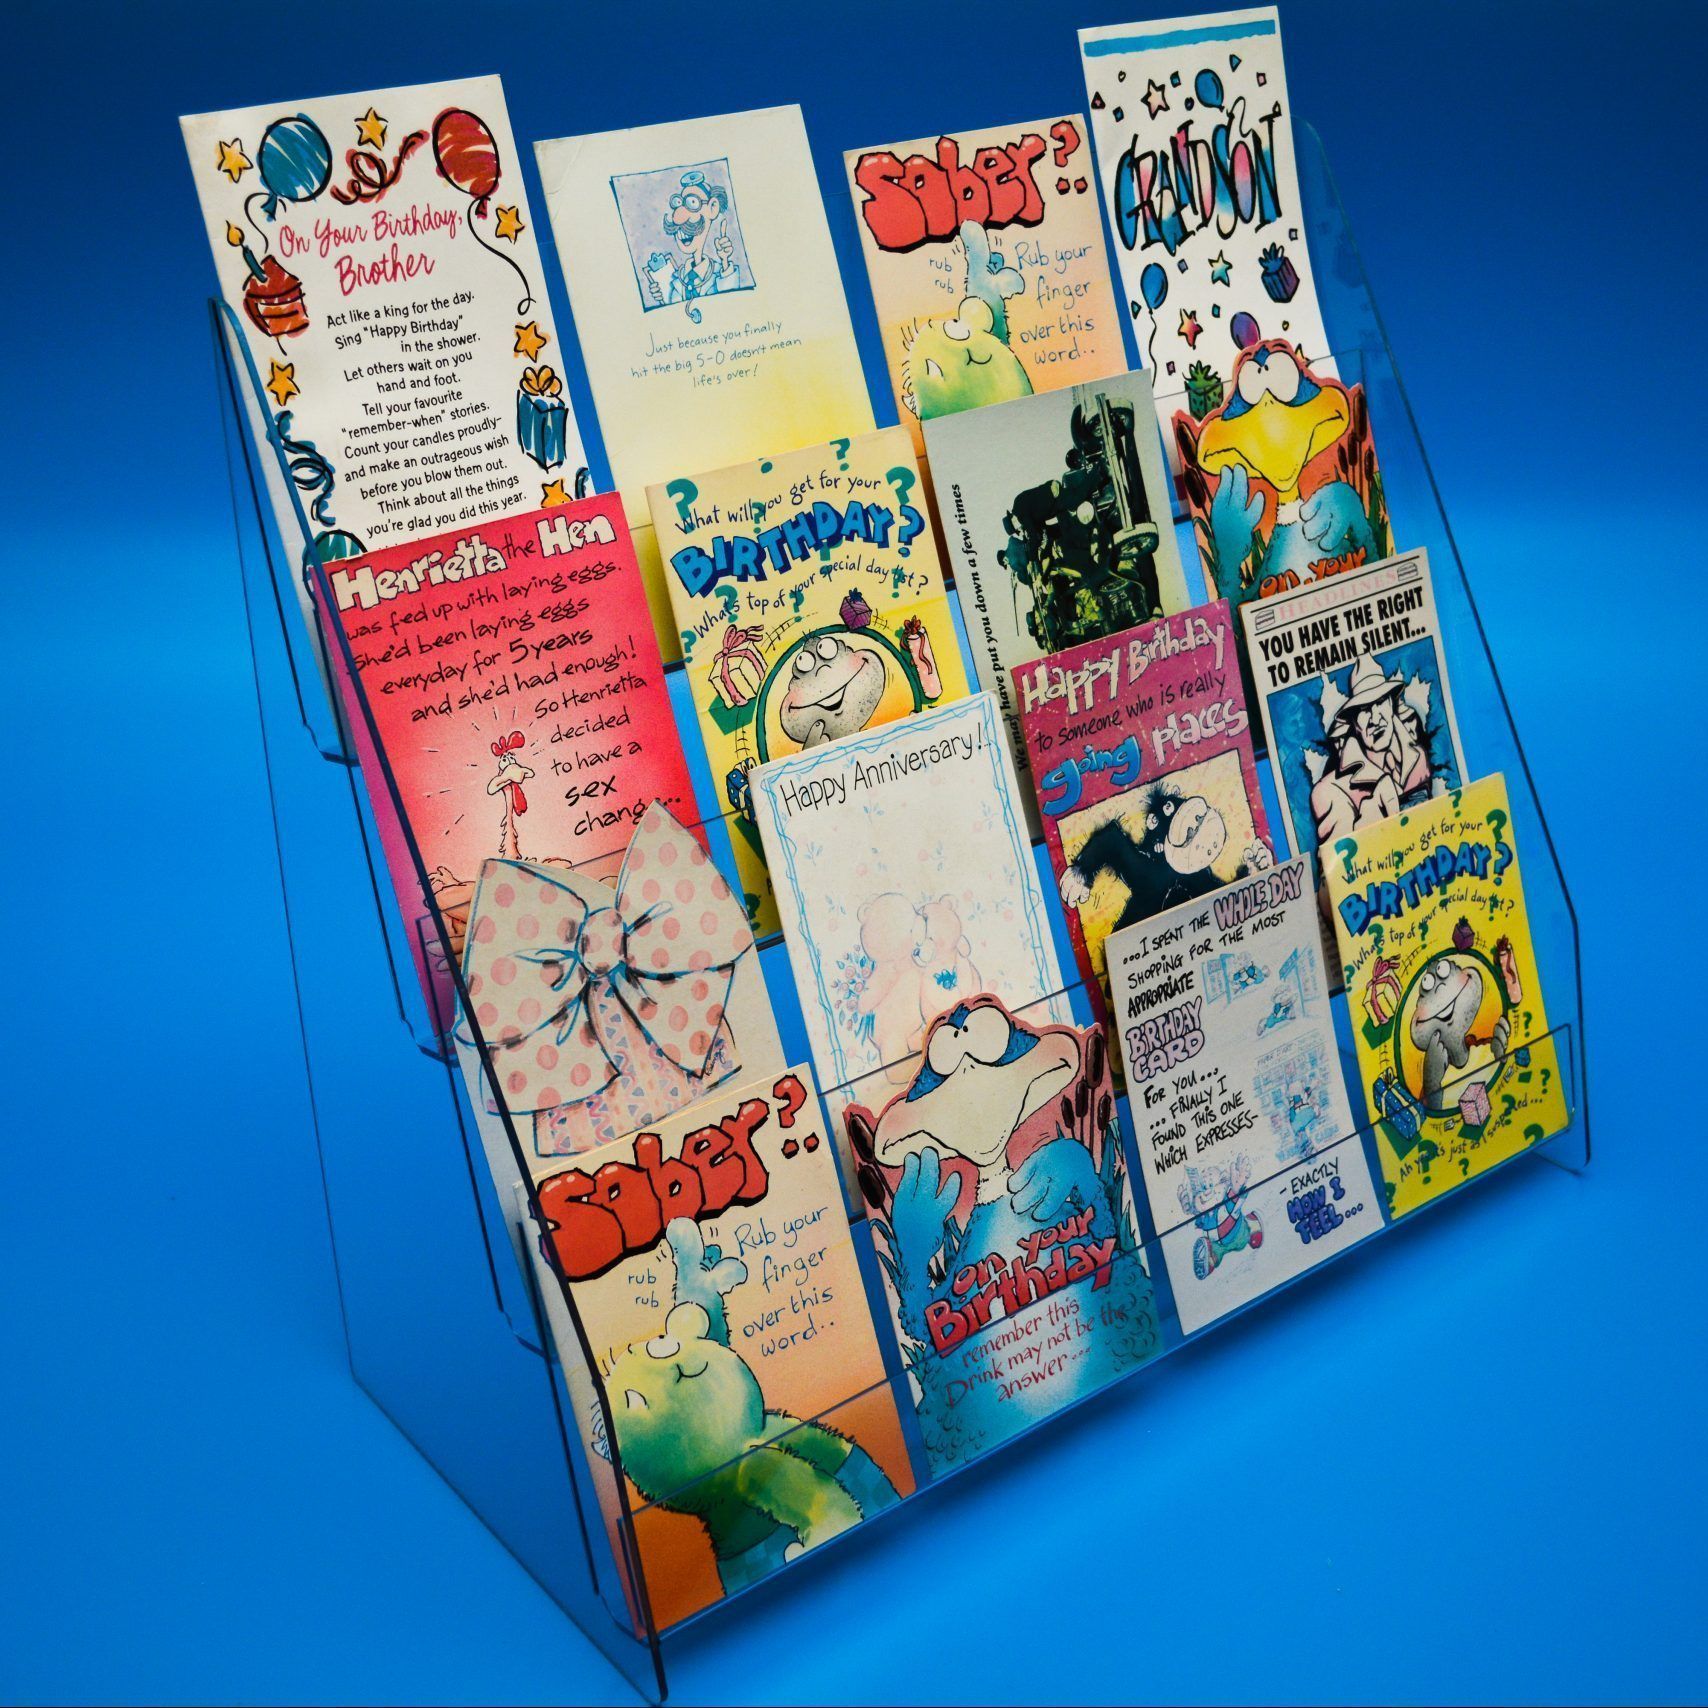 4-tier greeting card display stand designed to sit of shelf or counter, showing a range of greeting cards